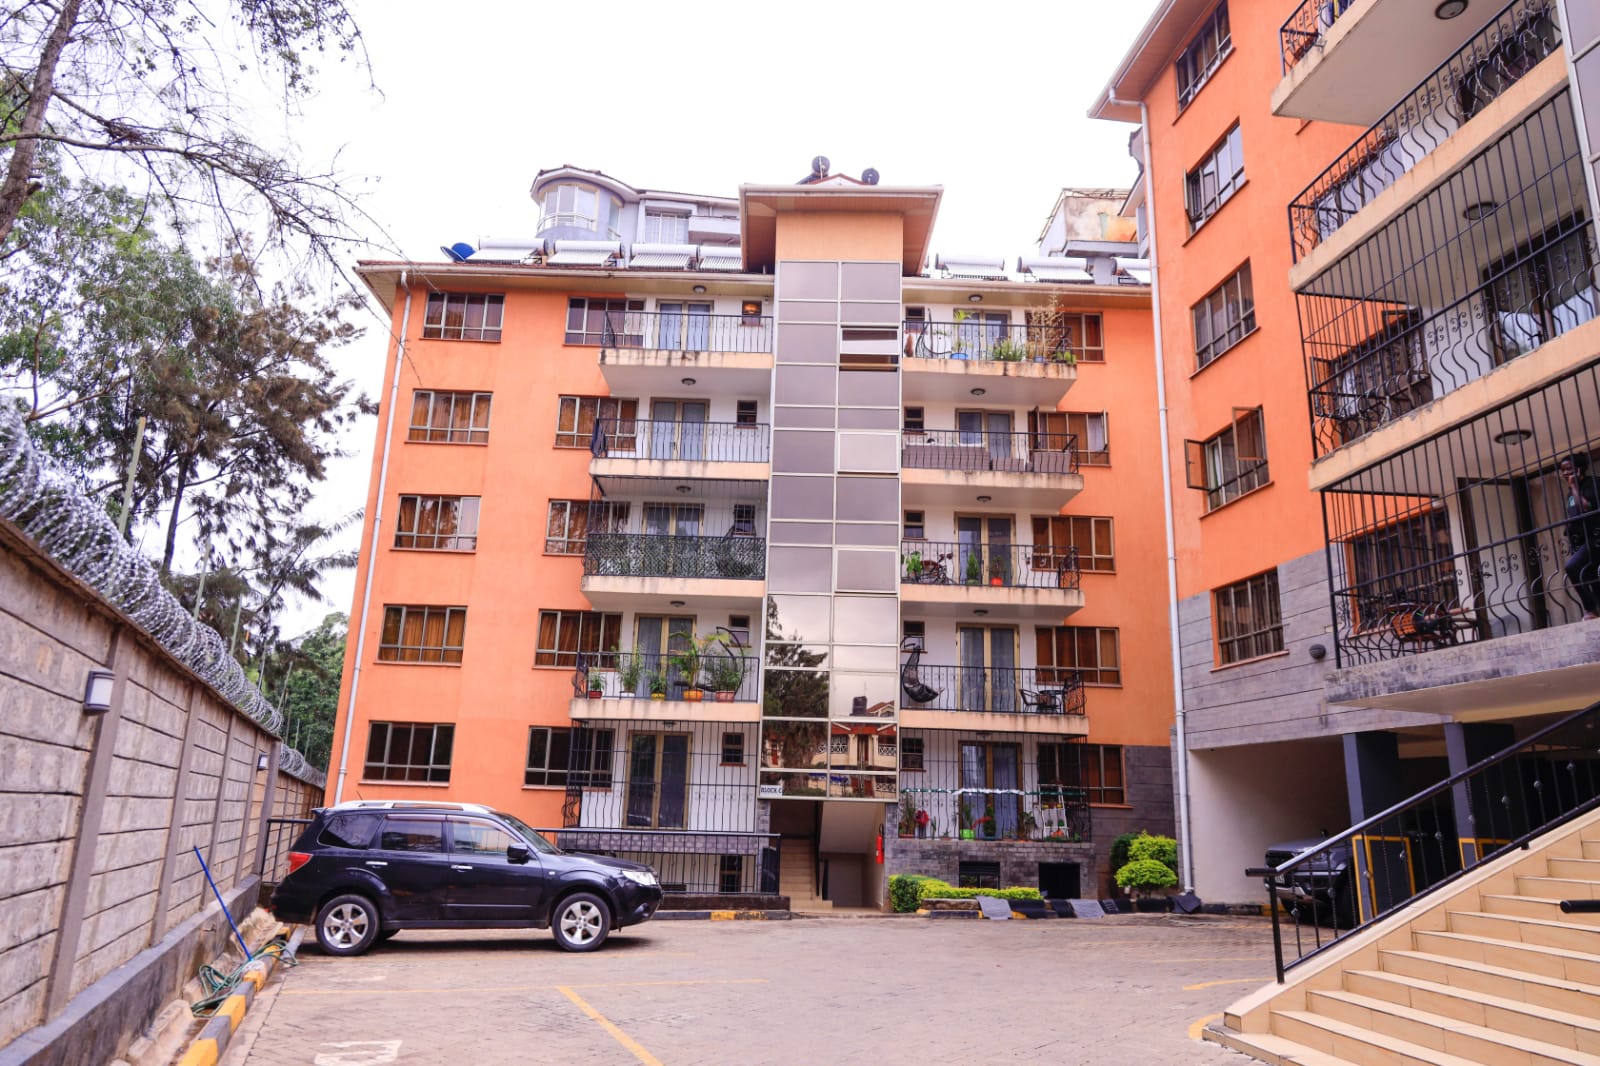 2 Bedroom Spacious Apartment Unfurnished for Rent at Ksh70k with exciting amenities in Lavington, Nairobi